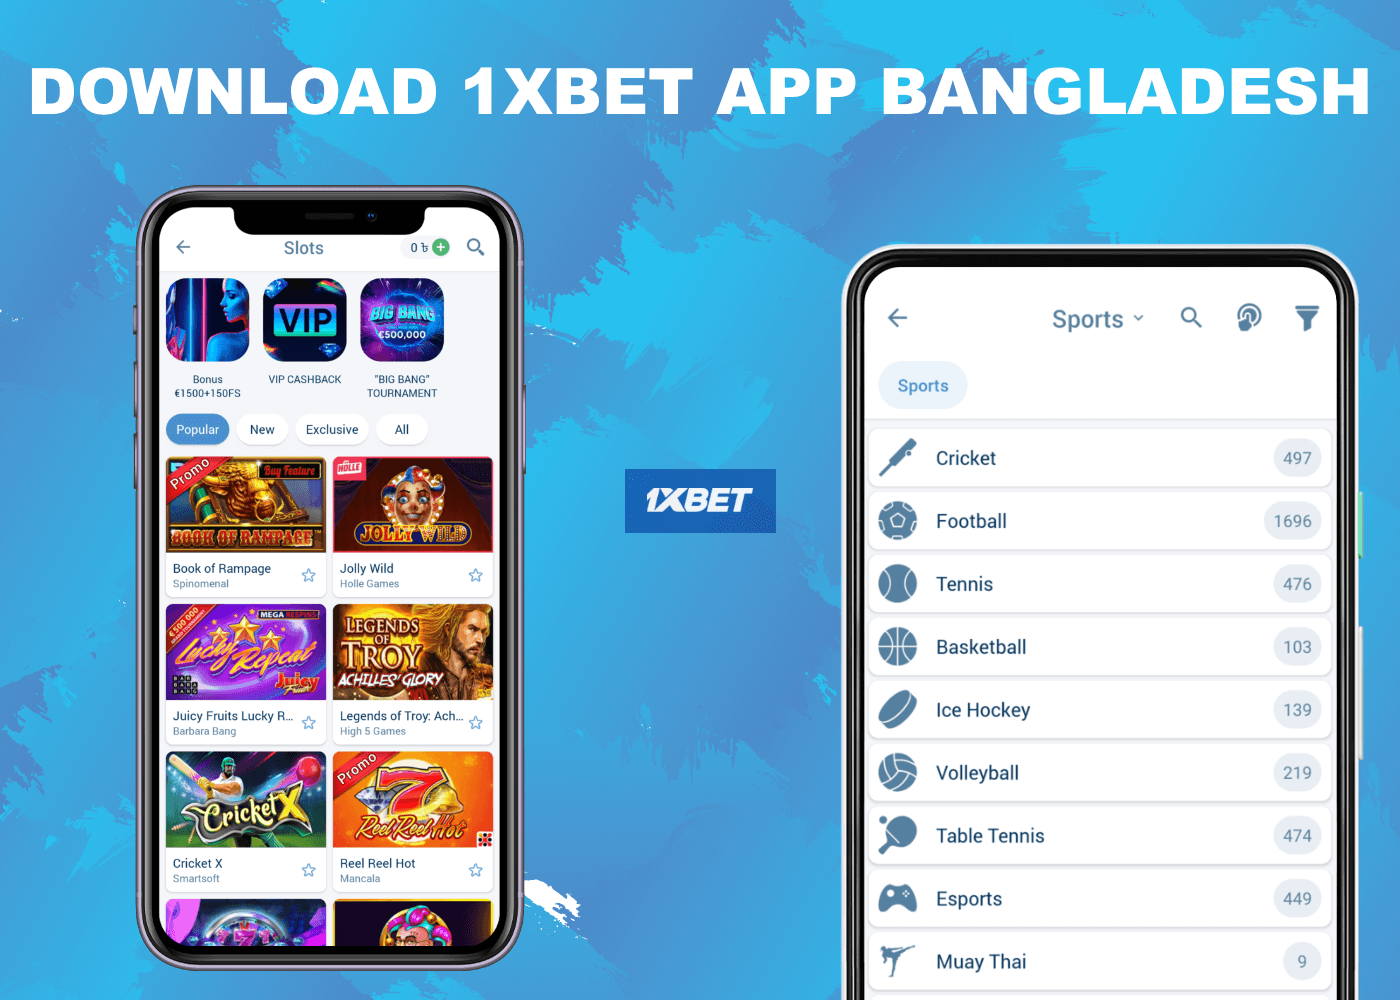 Free 1xbet Bangladesh mobile app for android and ios